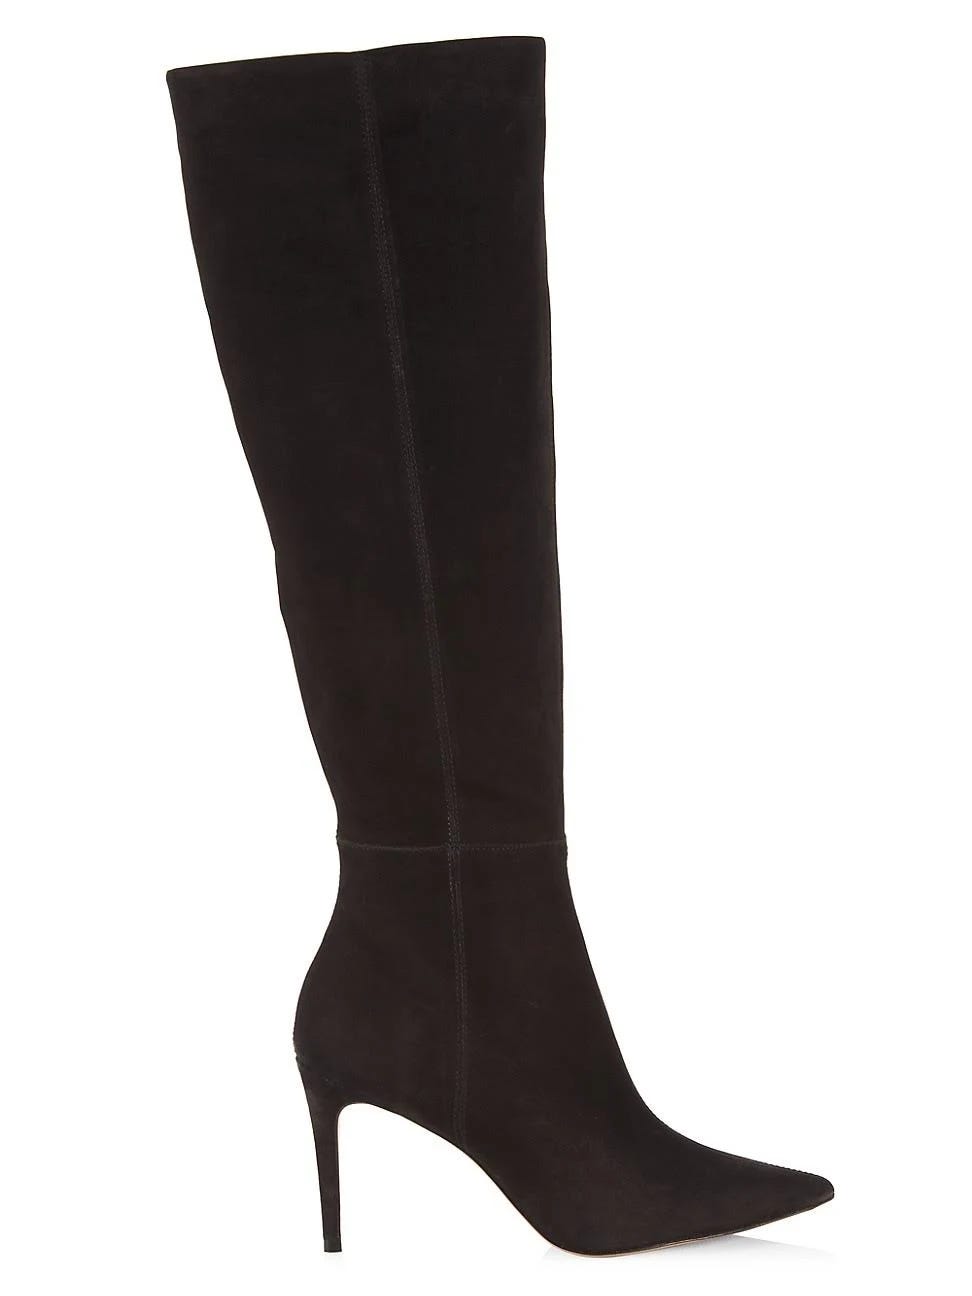 Saks Fifth Avenue Black Suede Knee-High Boots for Women, Size 6.5 | Image